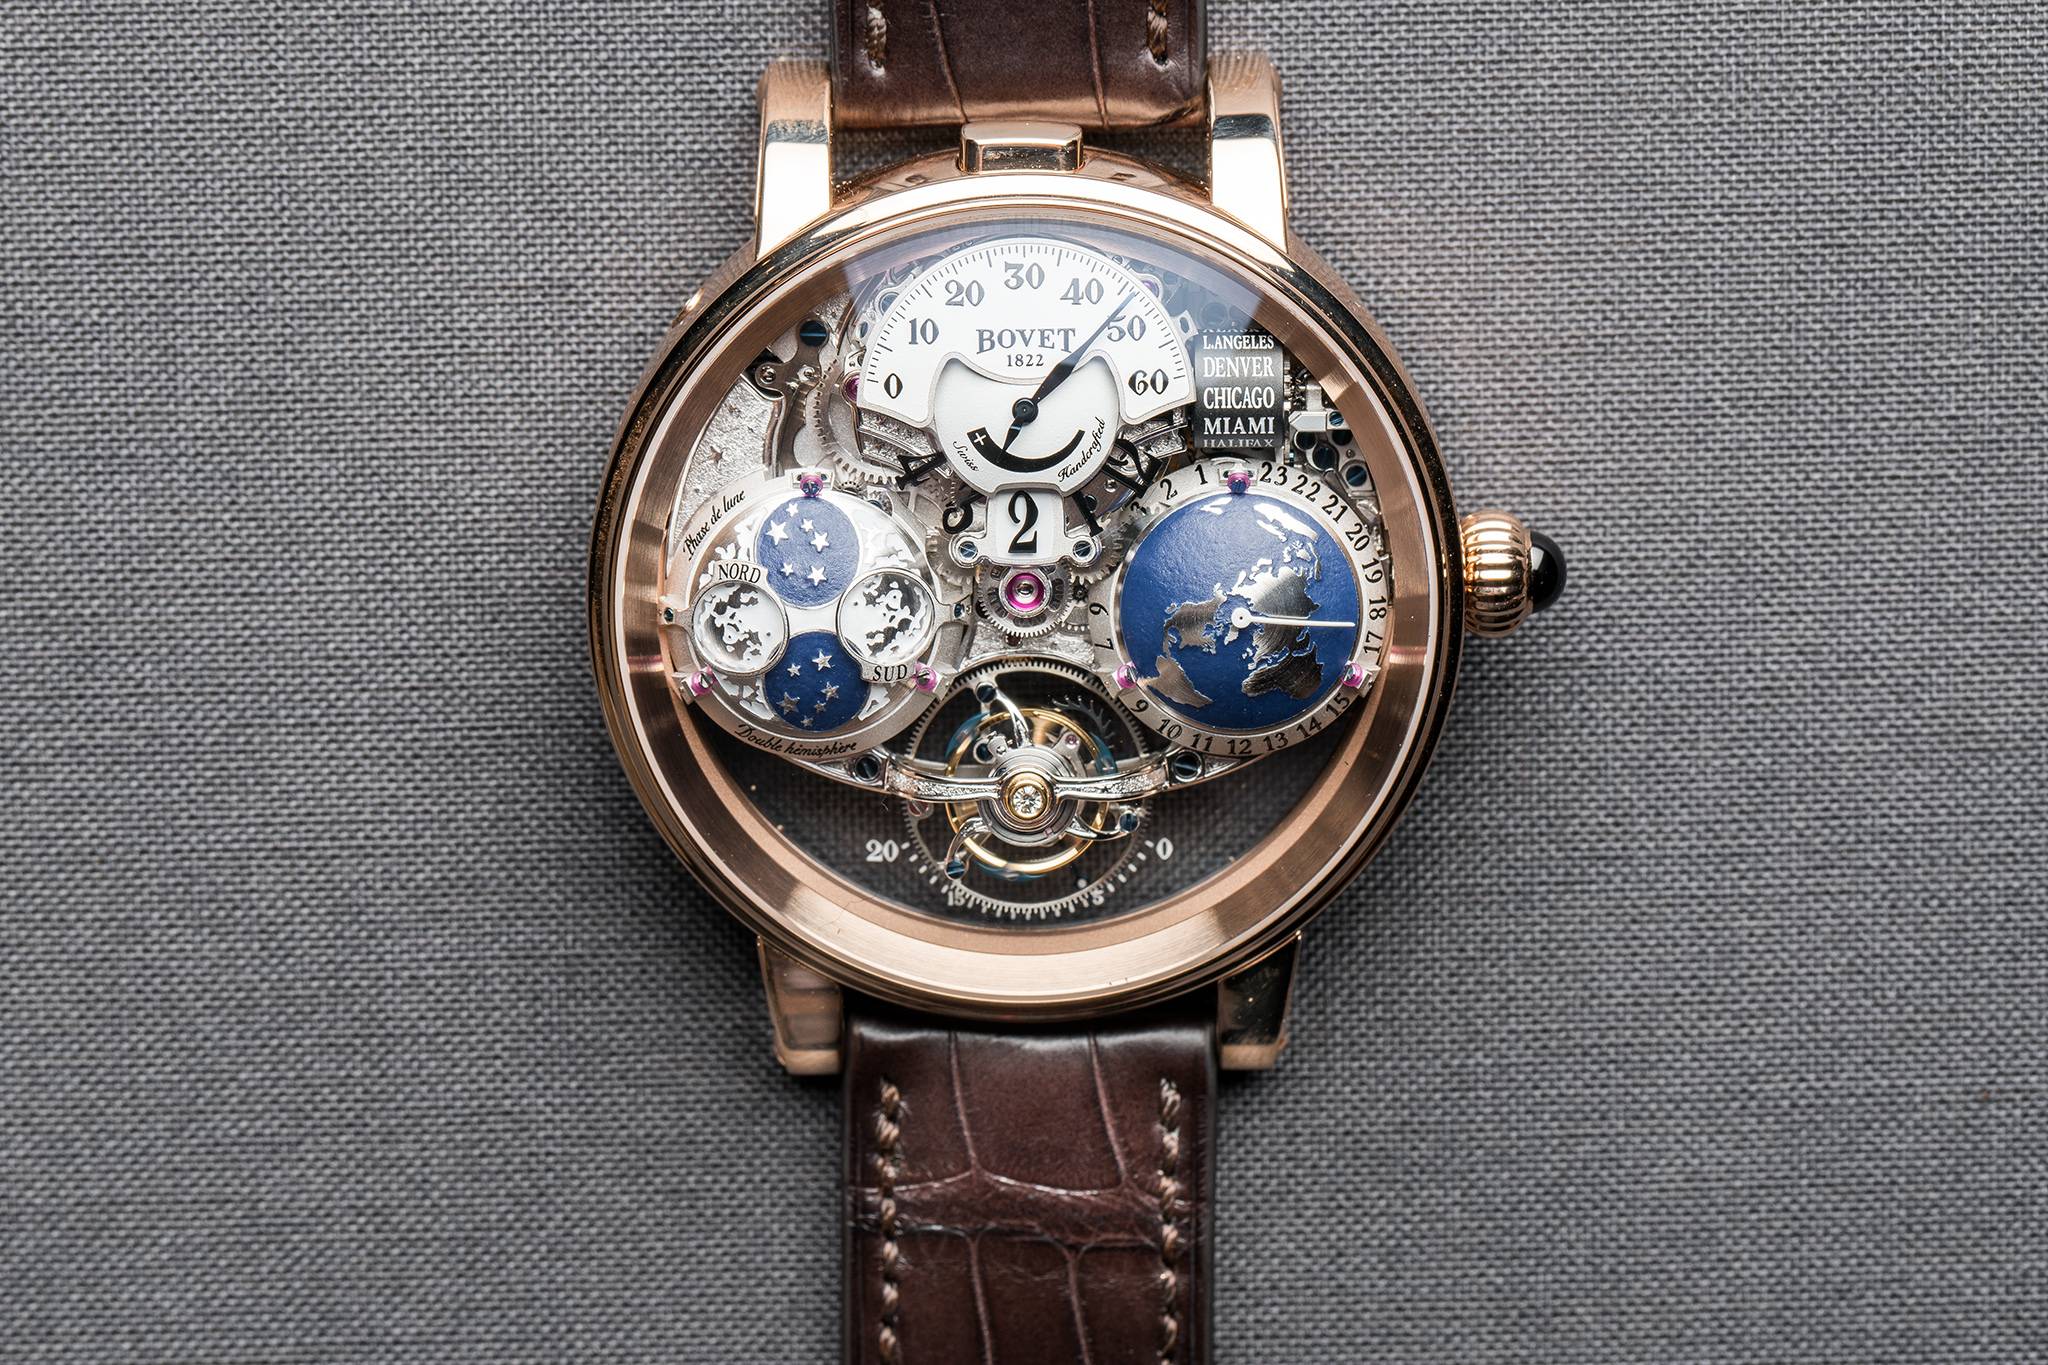 Introducing The Bovet Récital 18 – Shooting Star